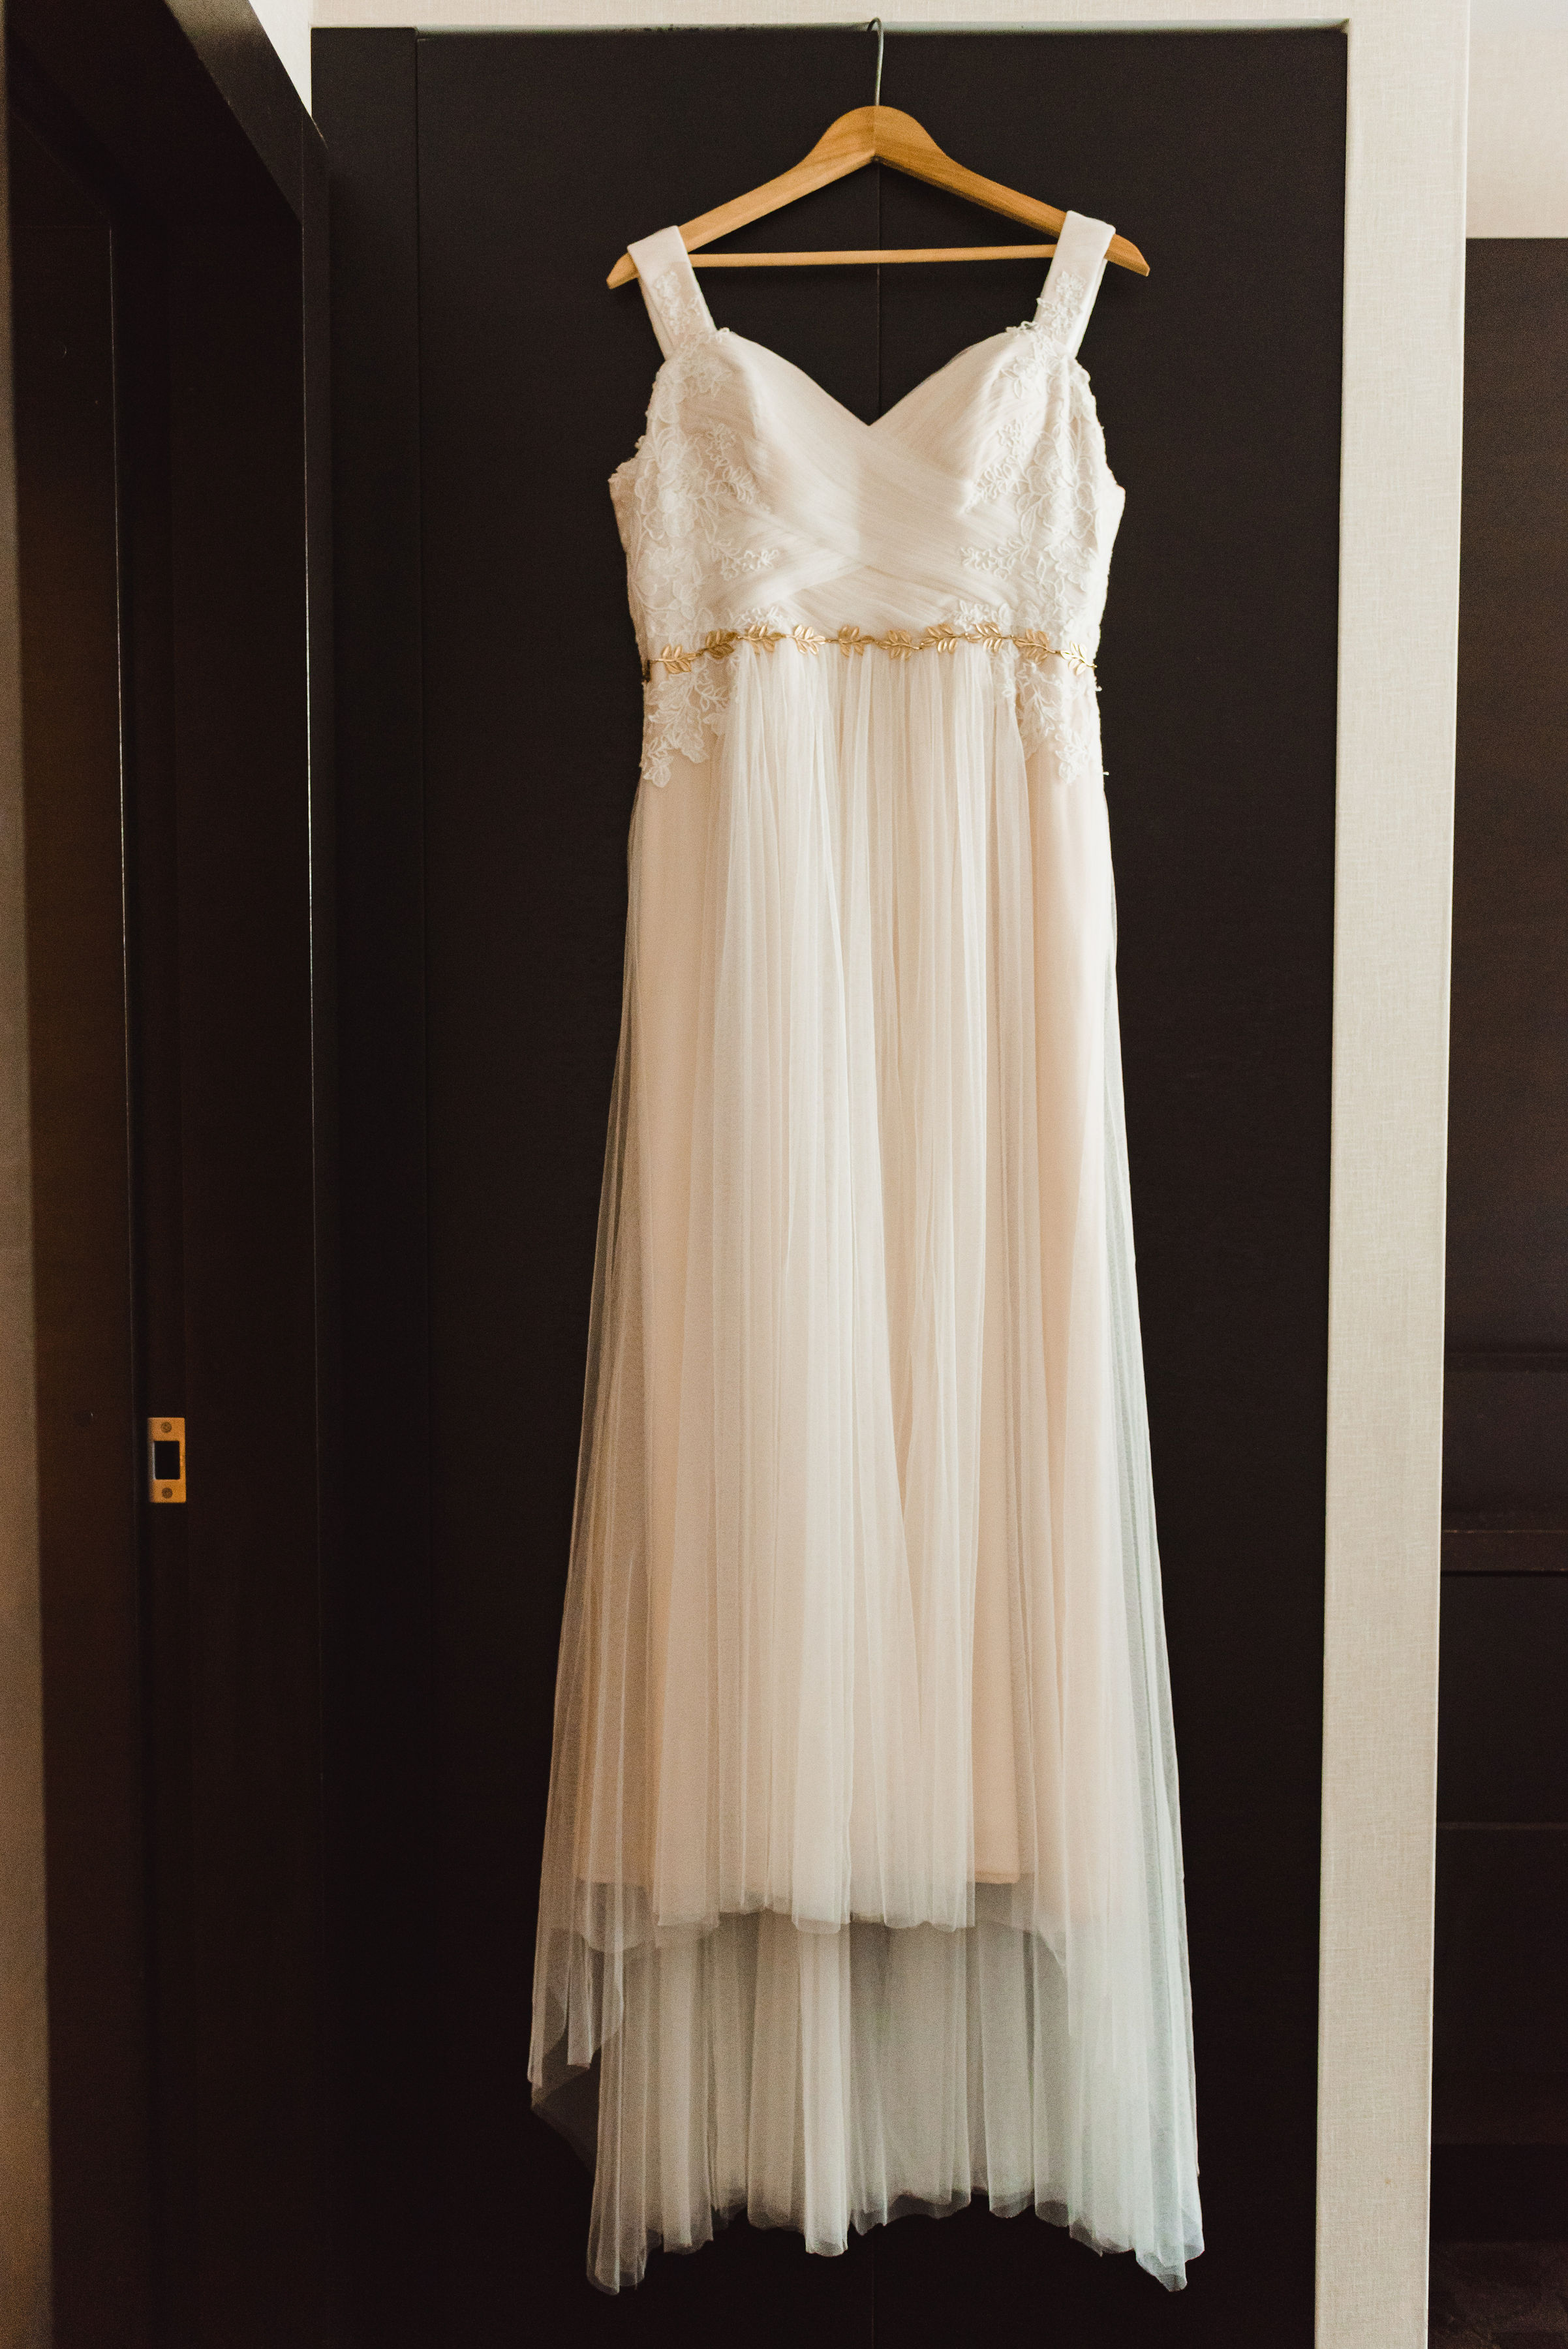 white wedding dress hanging on the back of a brown door Toronto brewery wedding photography 